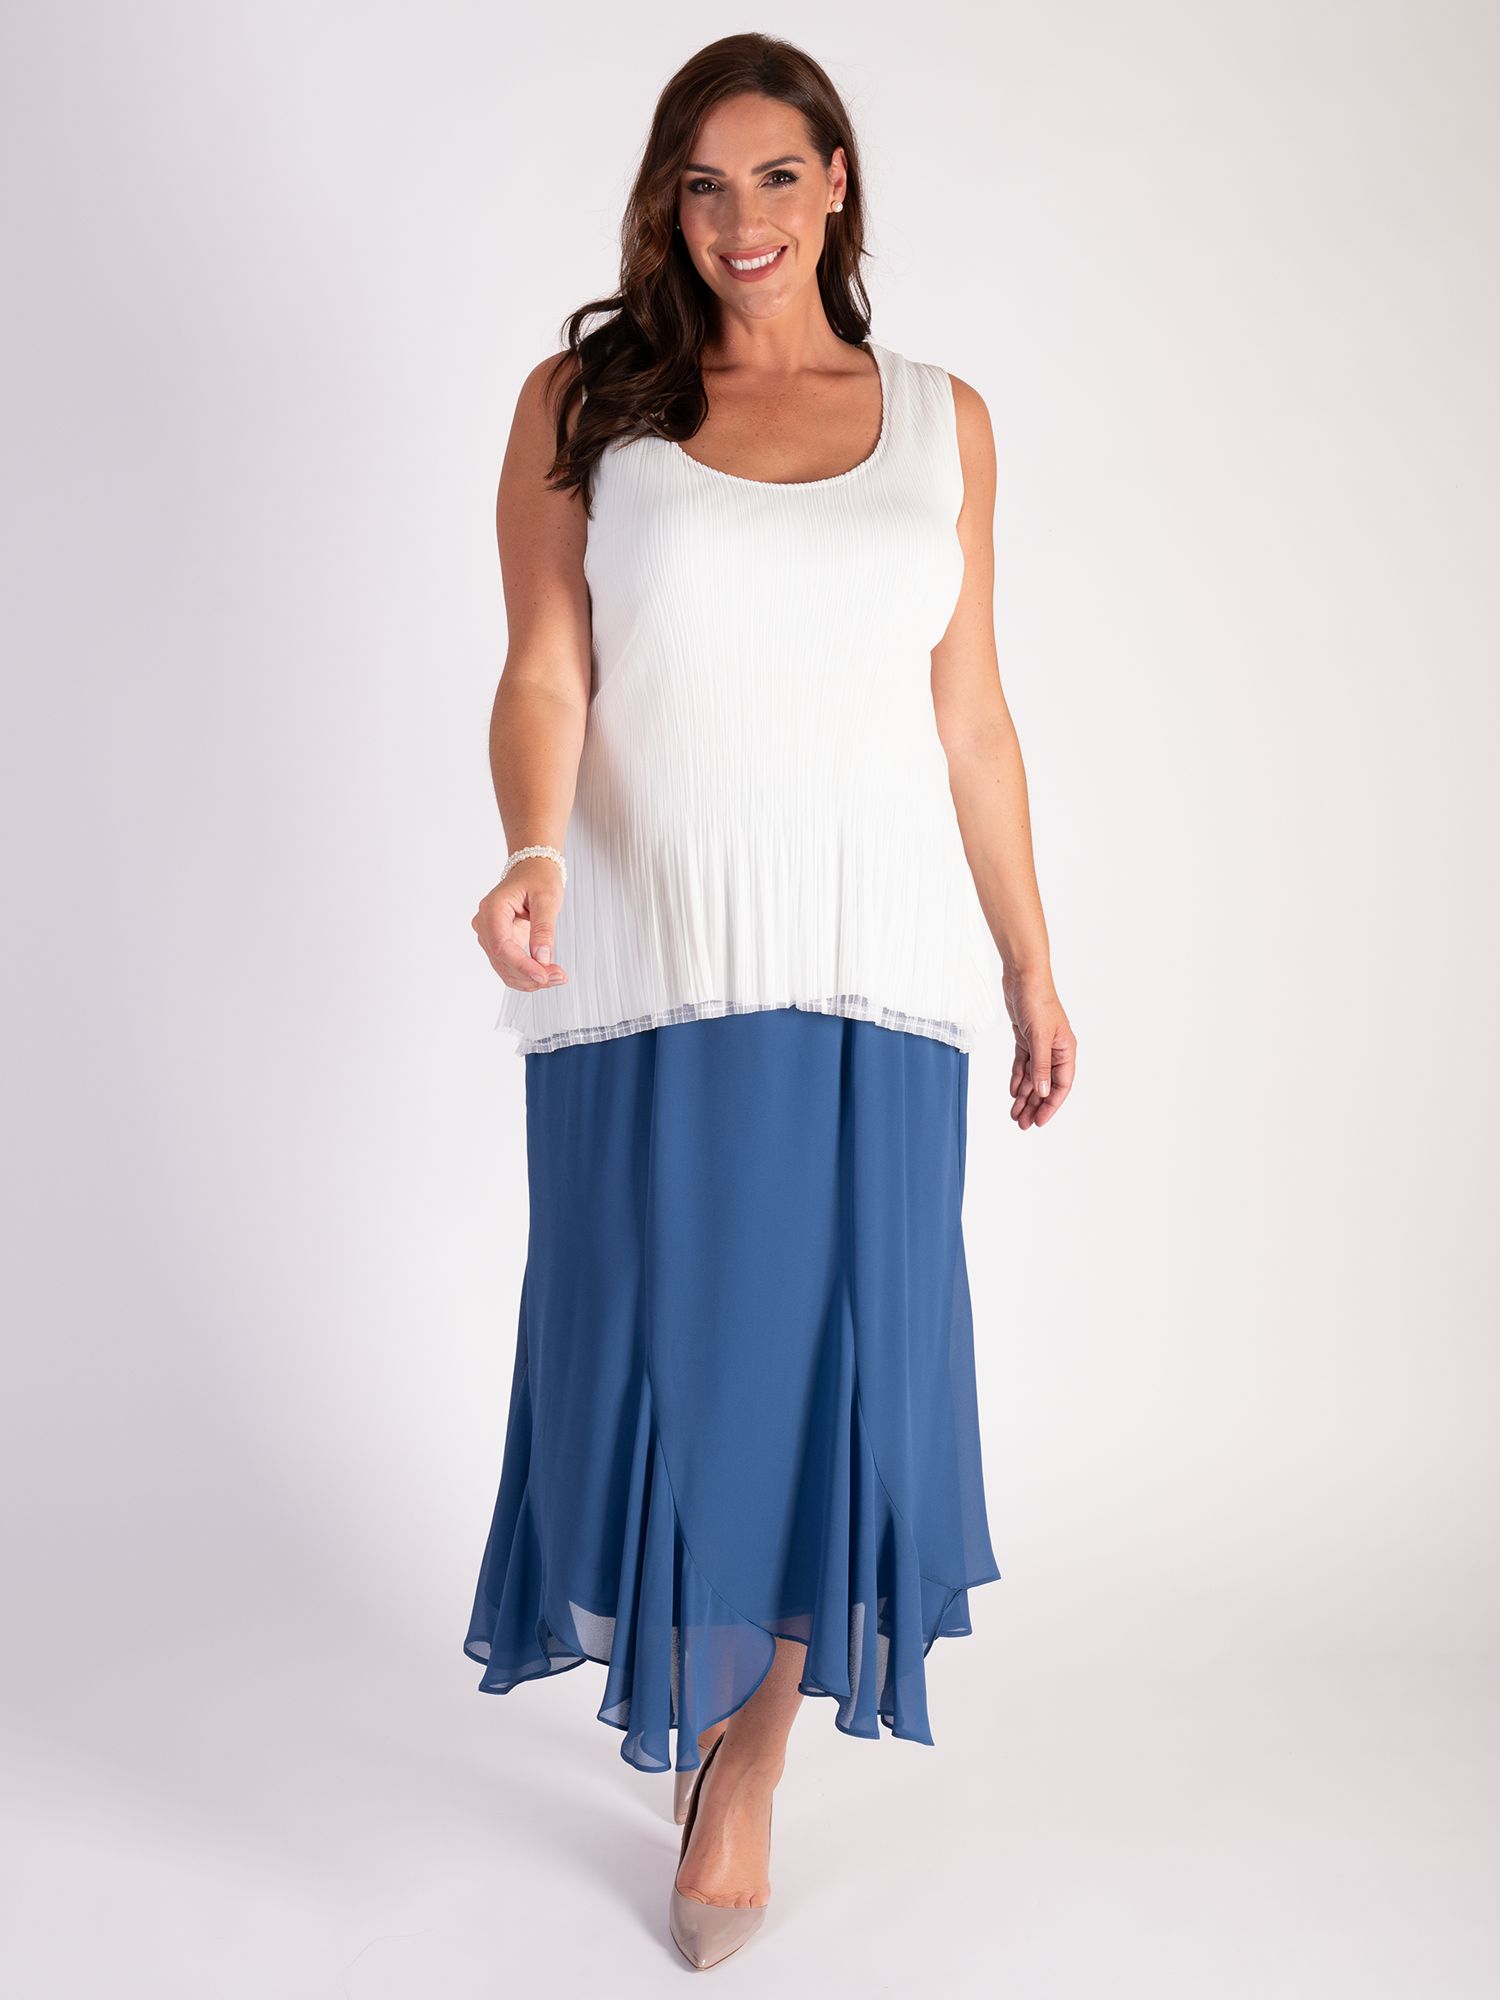 Buy chesca Chiffon Skirt Online at johnlewis.com